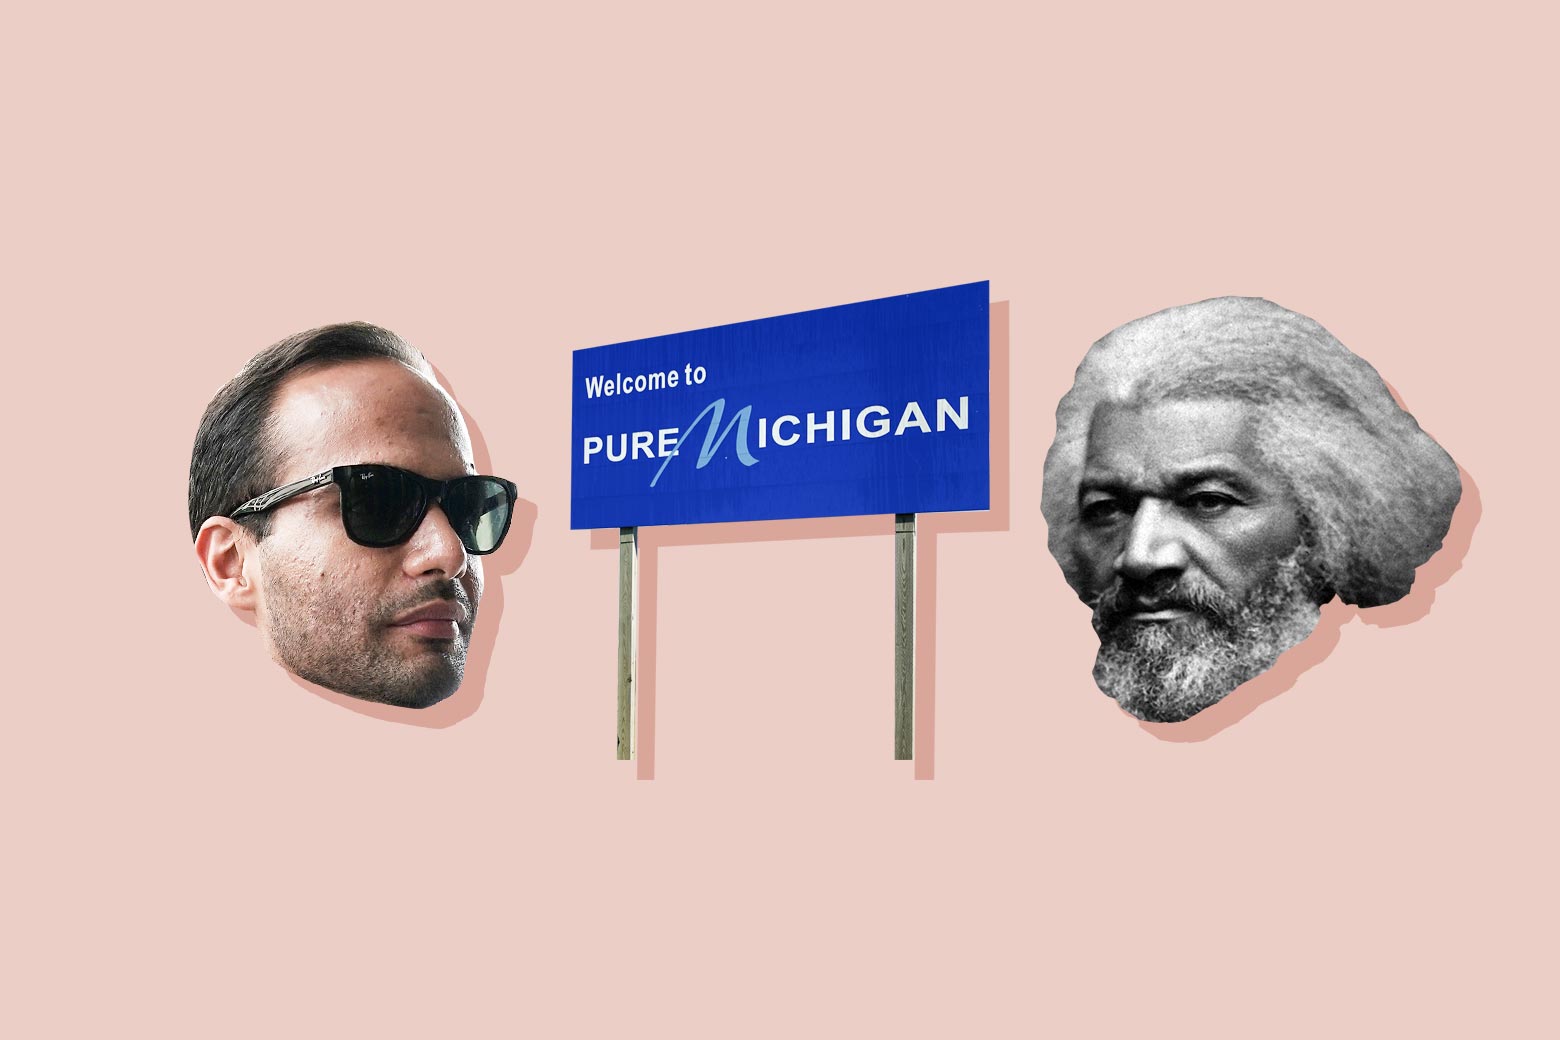 George Papadopoulos, a welcome to Pure Michigan sign, and Frederick Douglass. 